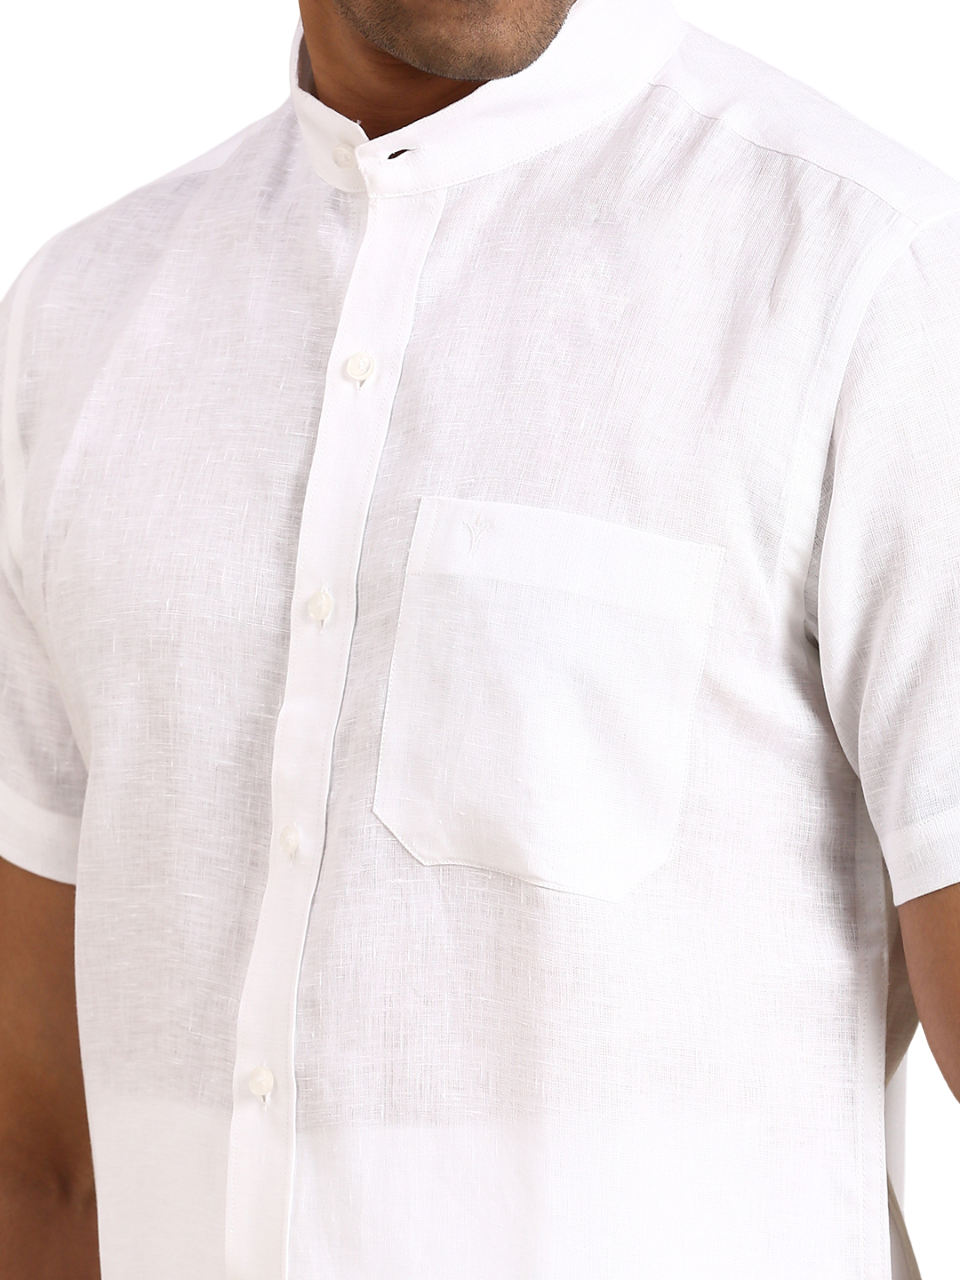 Mens 100% Linen Chinese Collar White Shirt Half Sleeves 5445-Zoom view